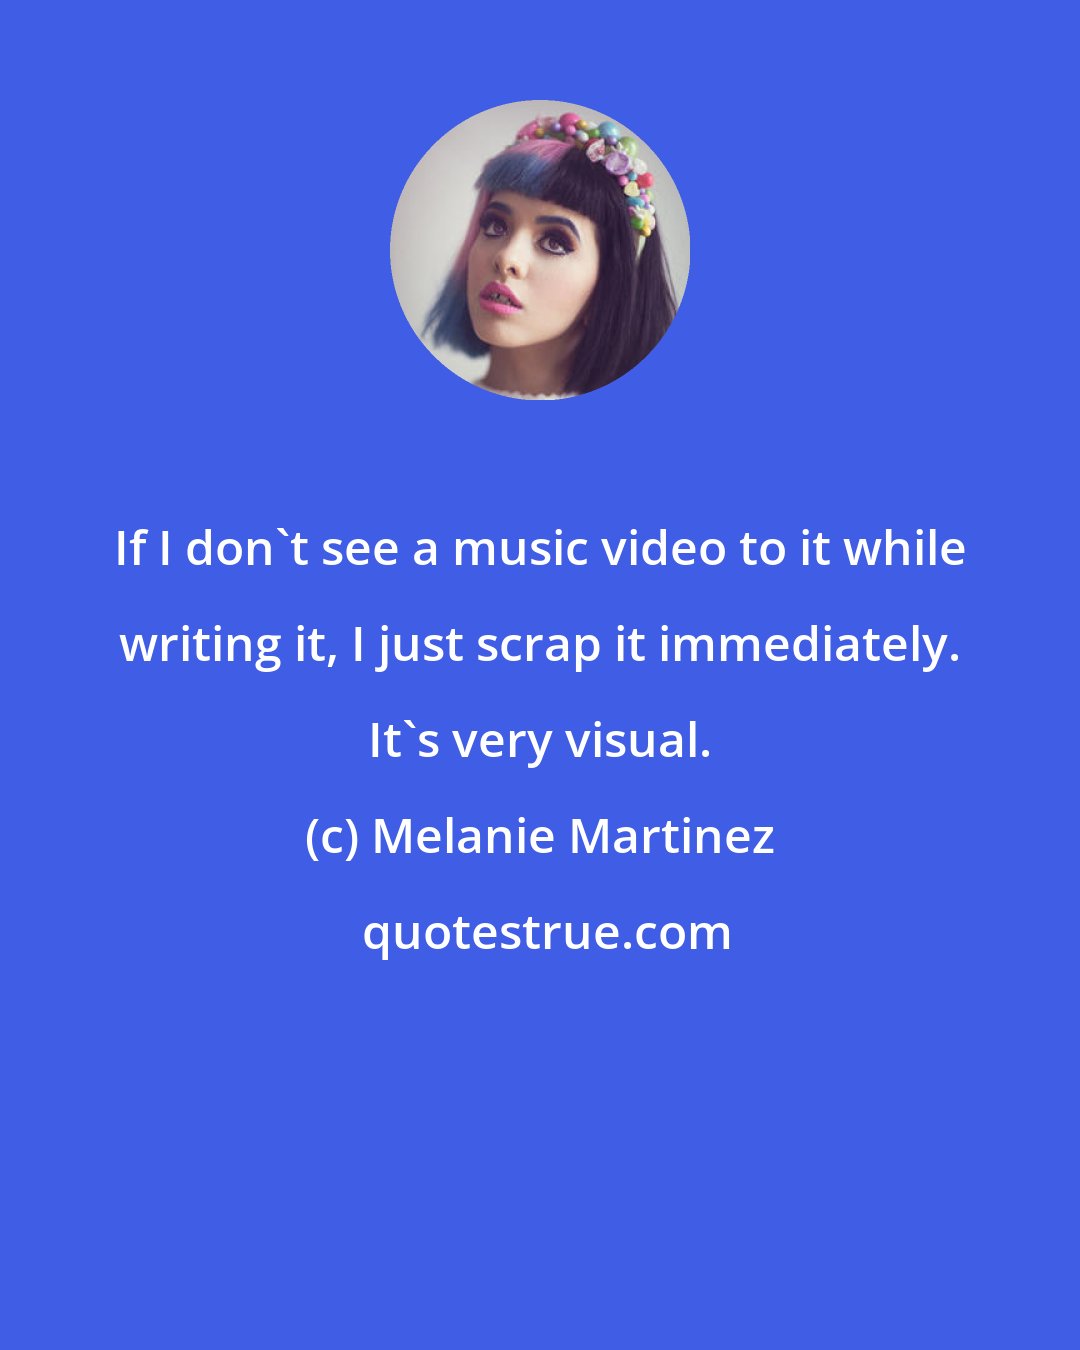 Melanie Martinez: If I don't see a music video to it while writing it, I just scrap it immediately. It's very visual.